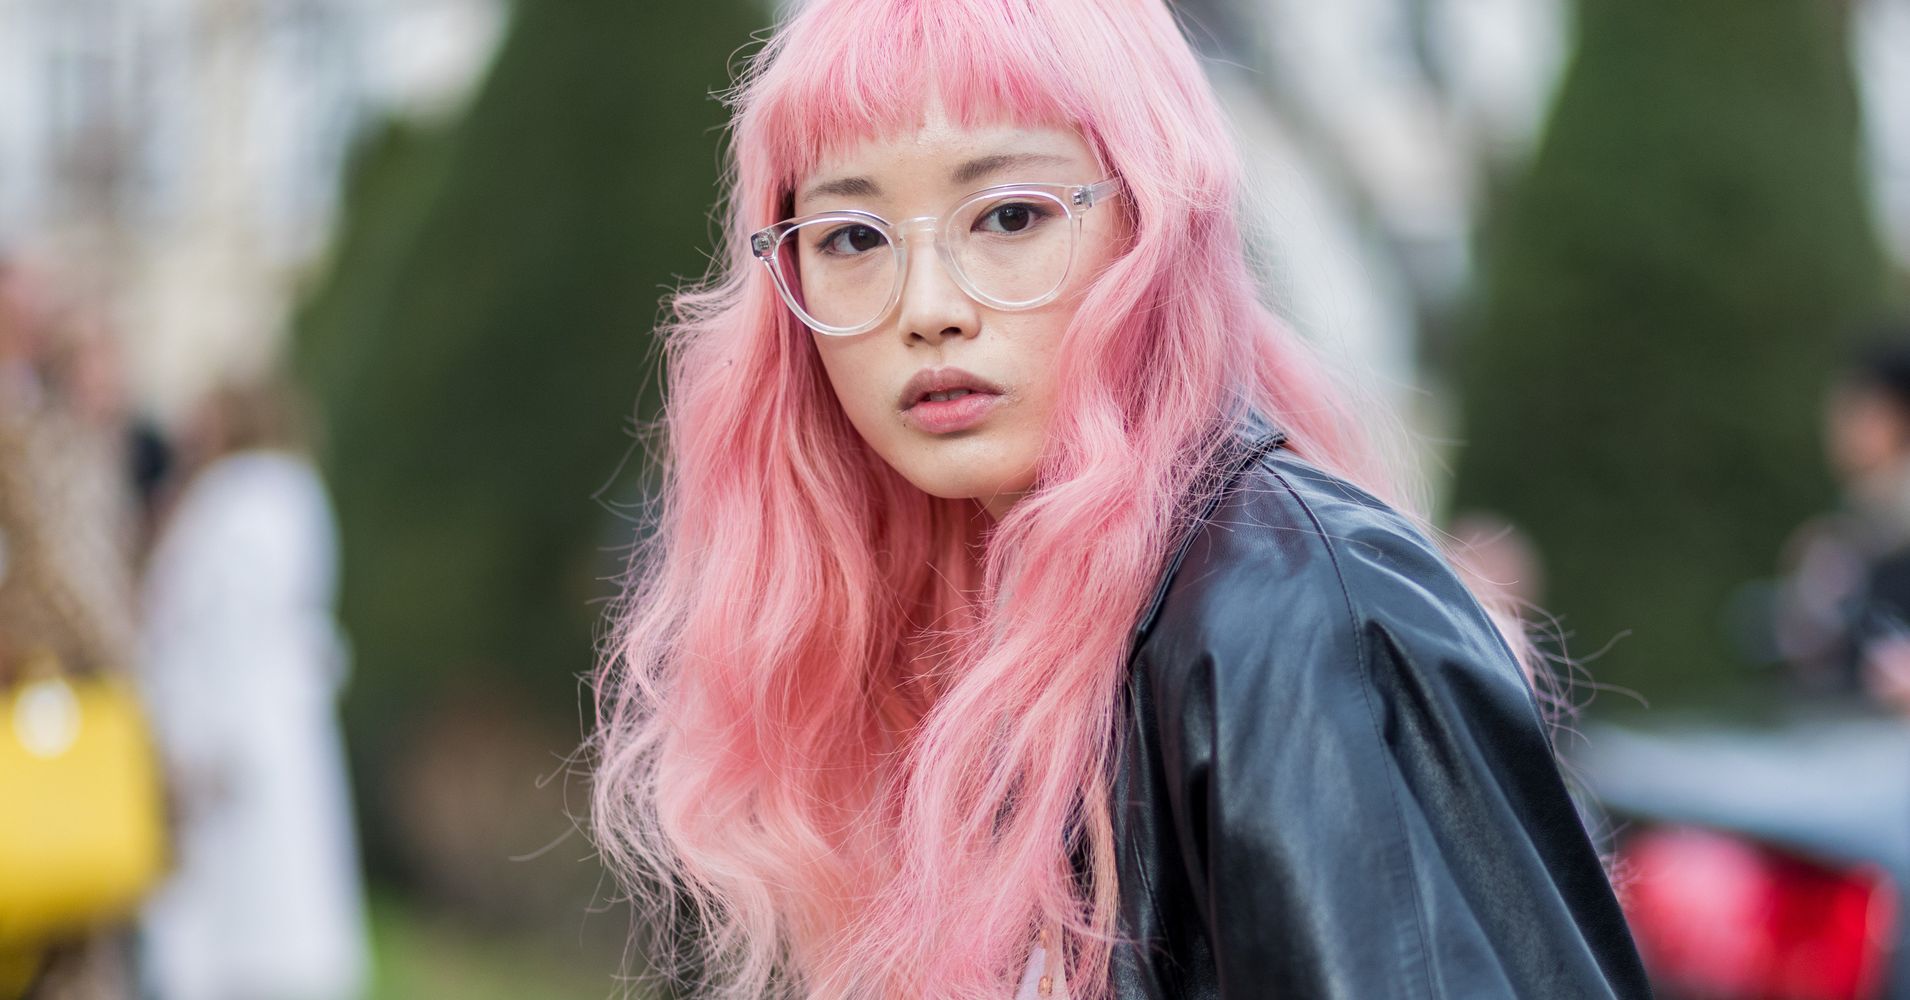 12 Things You Need To Know Before Dyeing Your Hair Pastel | HuffPost Life